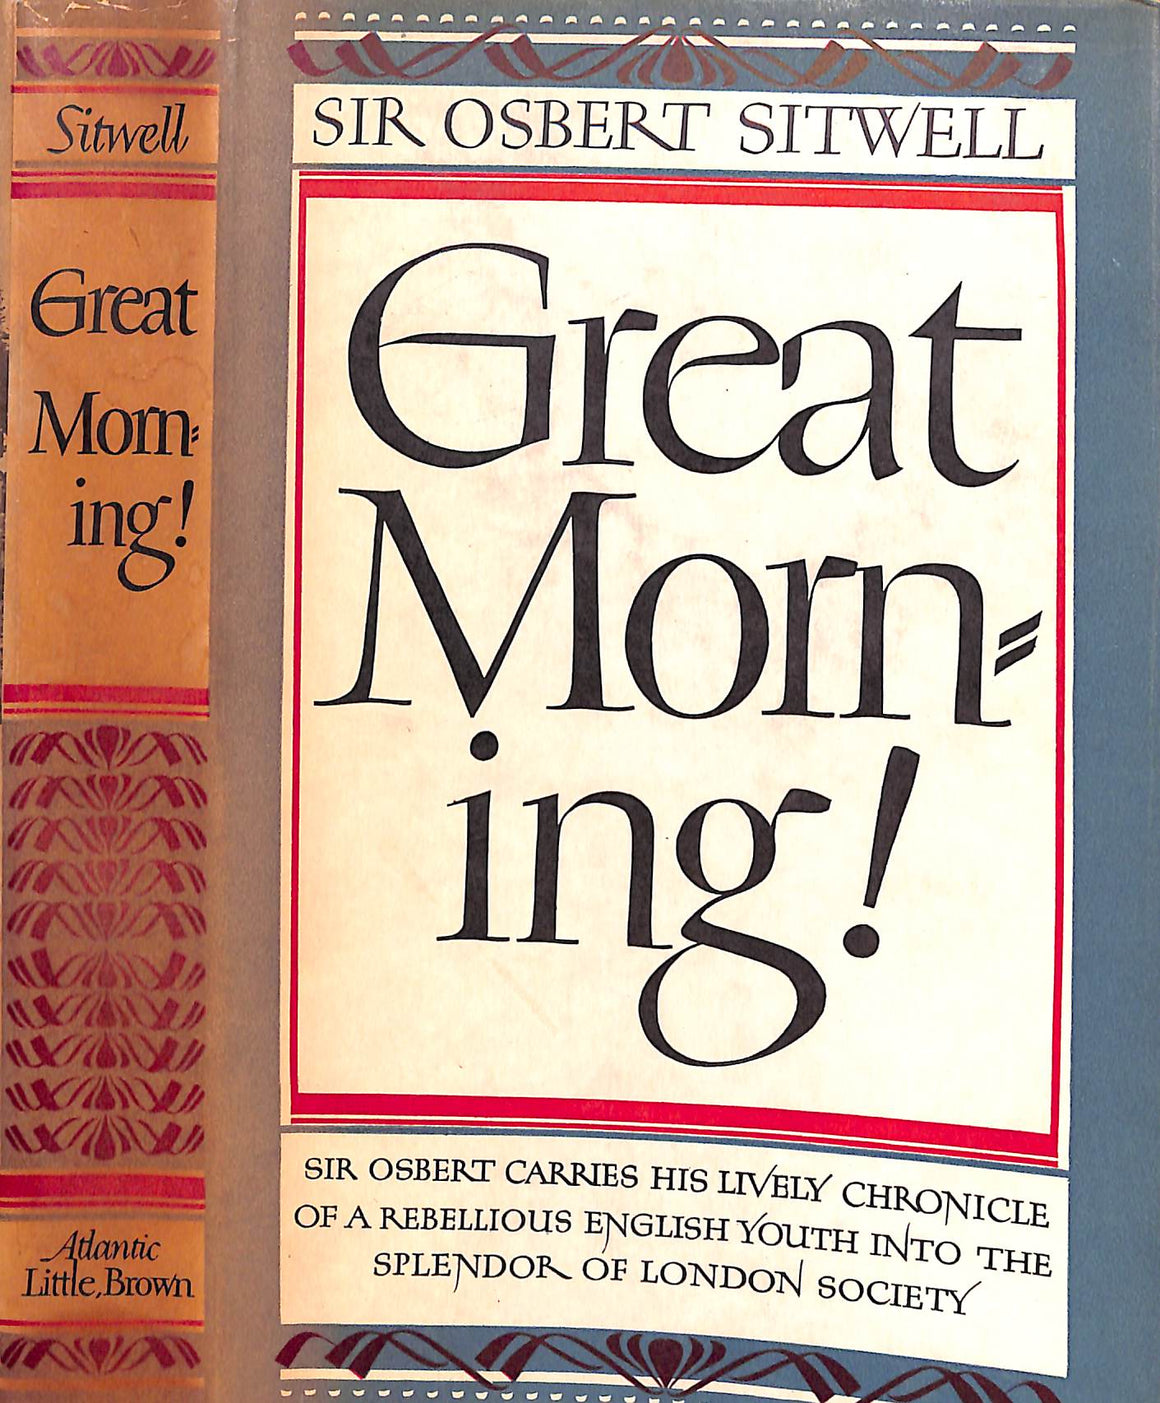 "Great Morning!" 1947 SITWELL, Osbert (INSCRIBED)